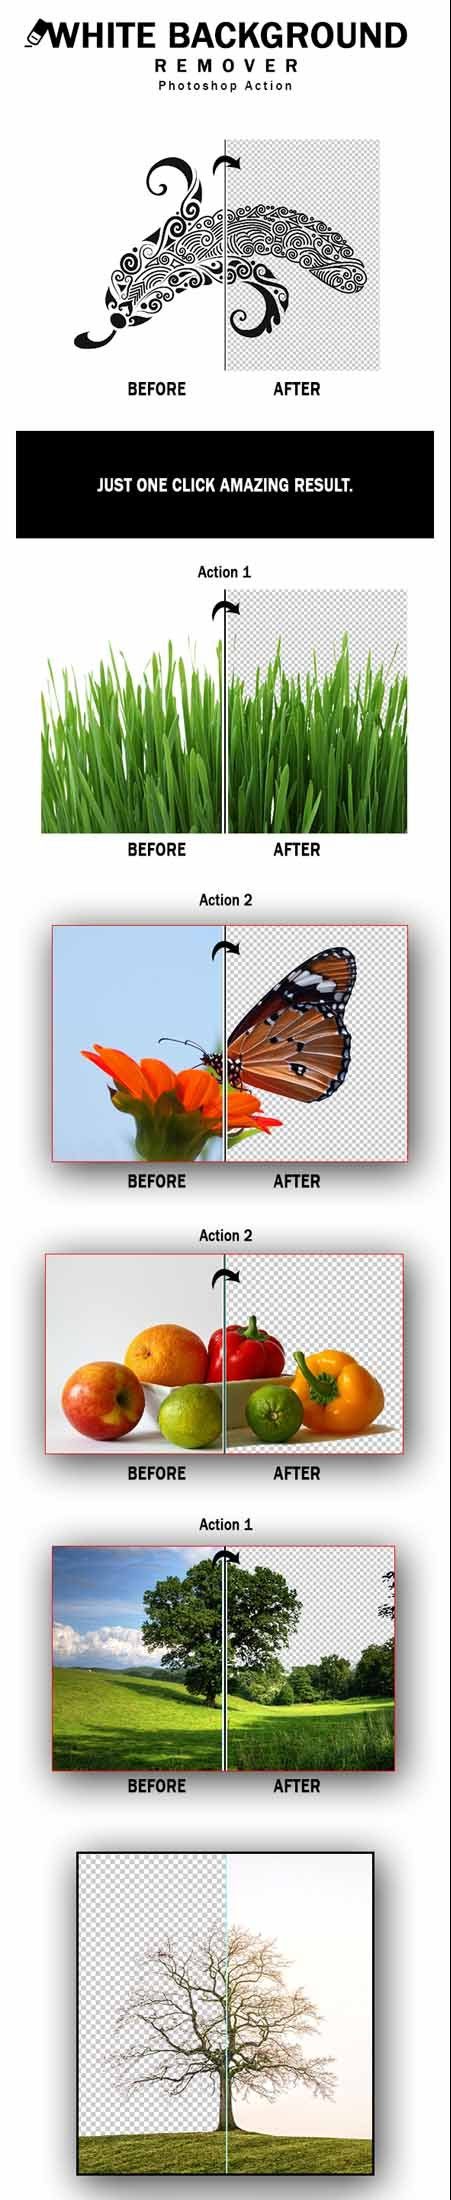 White Background Remover Photoshop Action 25820758 Free Download